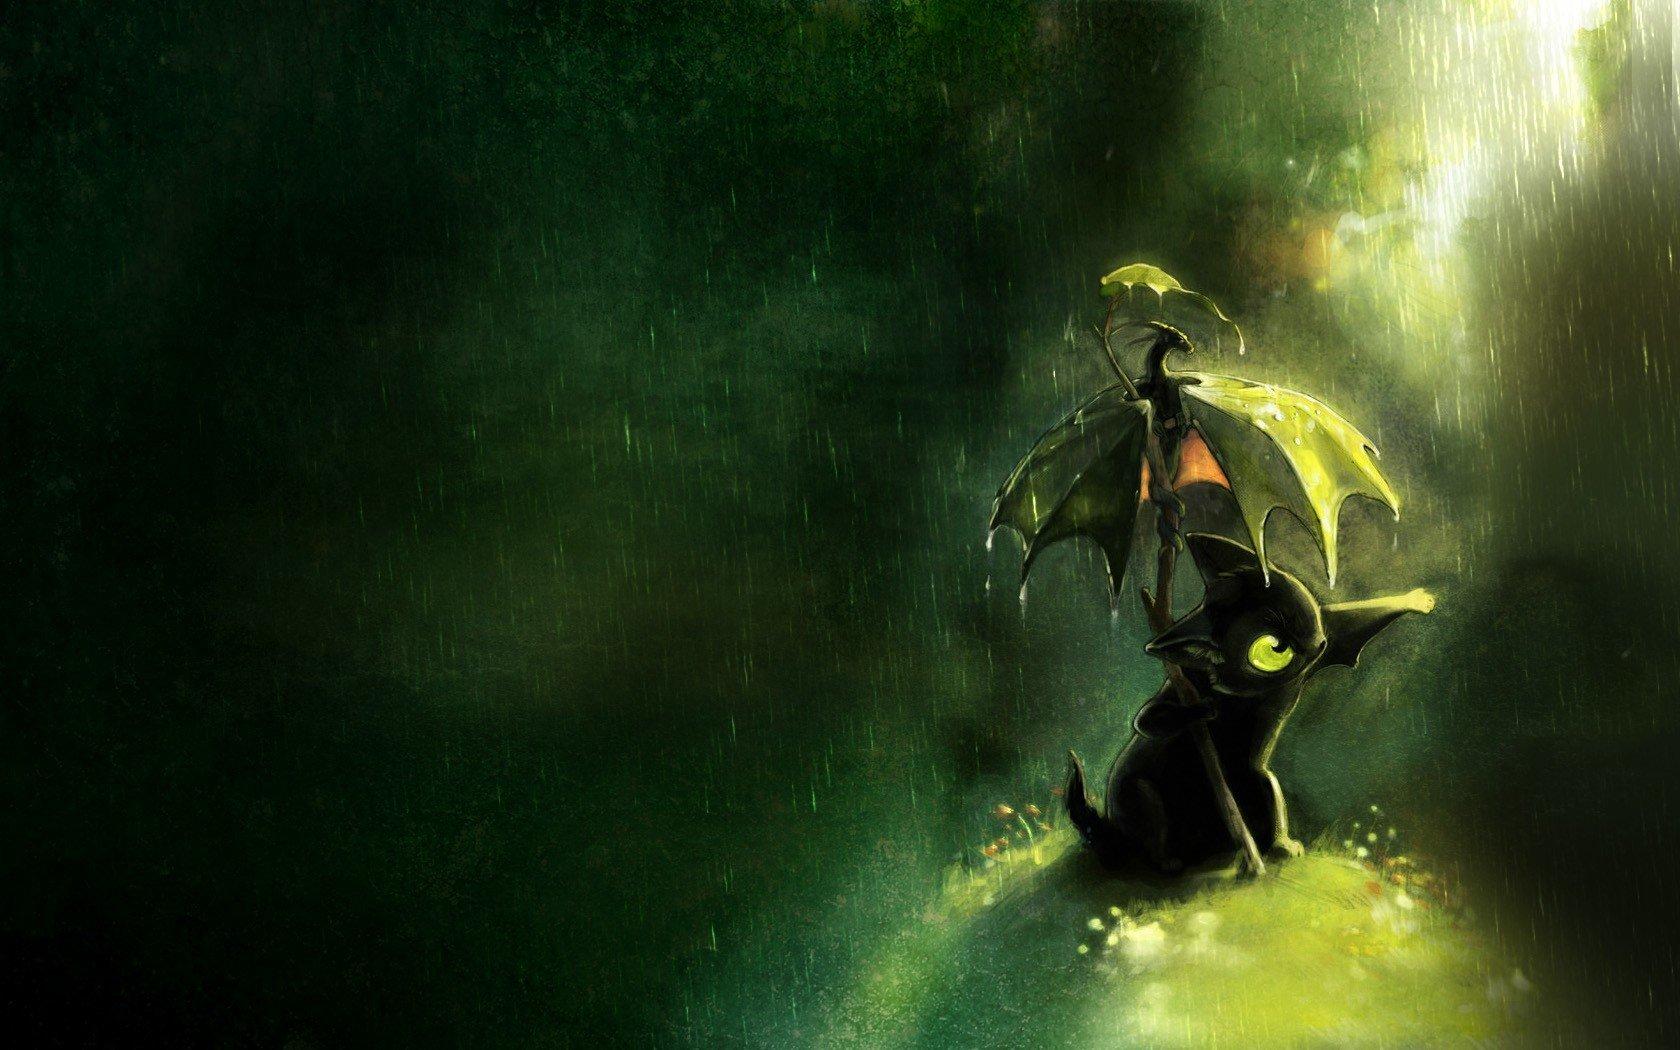 Toothless (How To Train Your Dragon) wallpaper 1680x1050